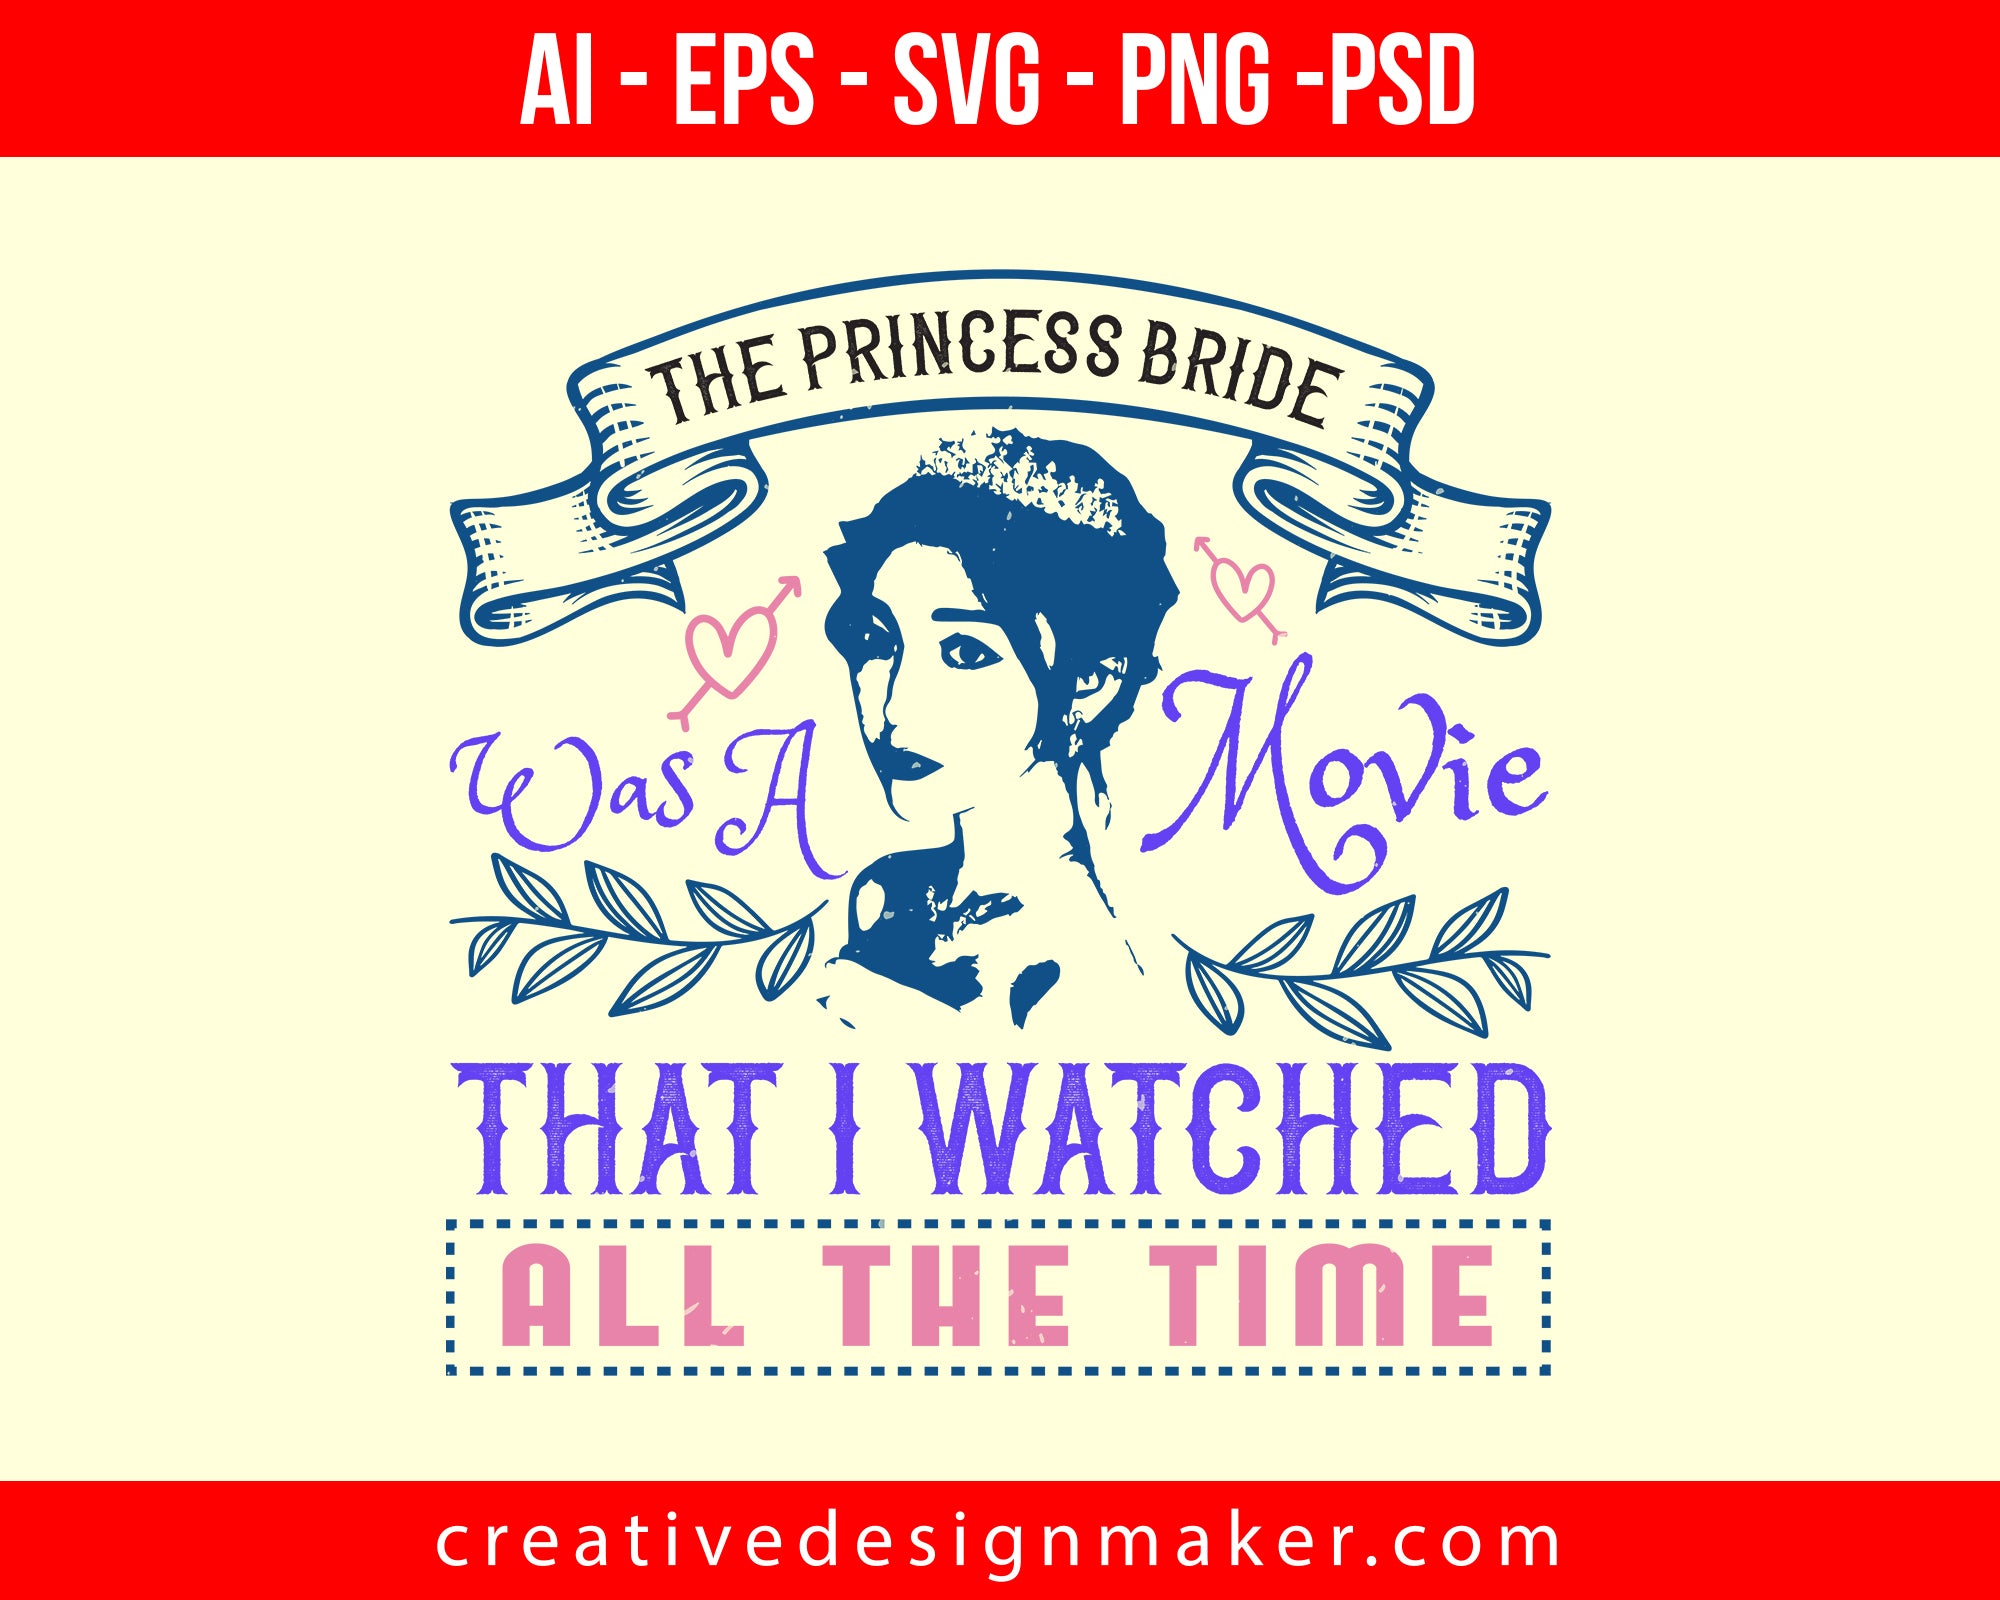 Download The Princess Bride Was A Movie That I Watched All The Time Creativedesignmaker